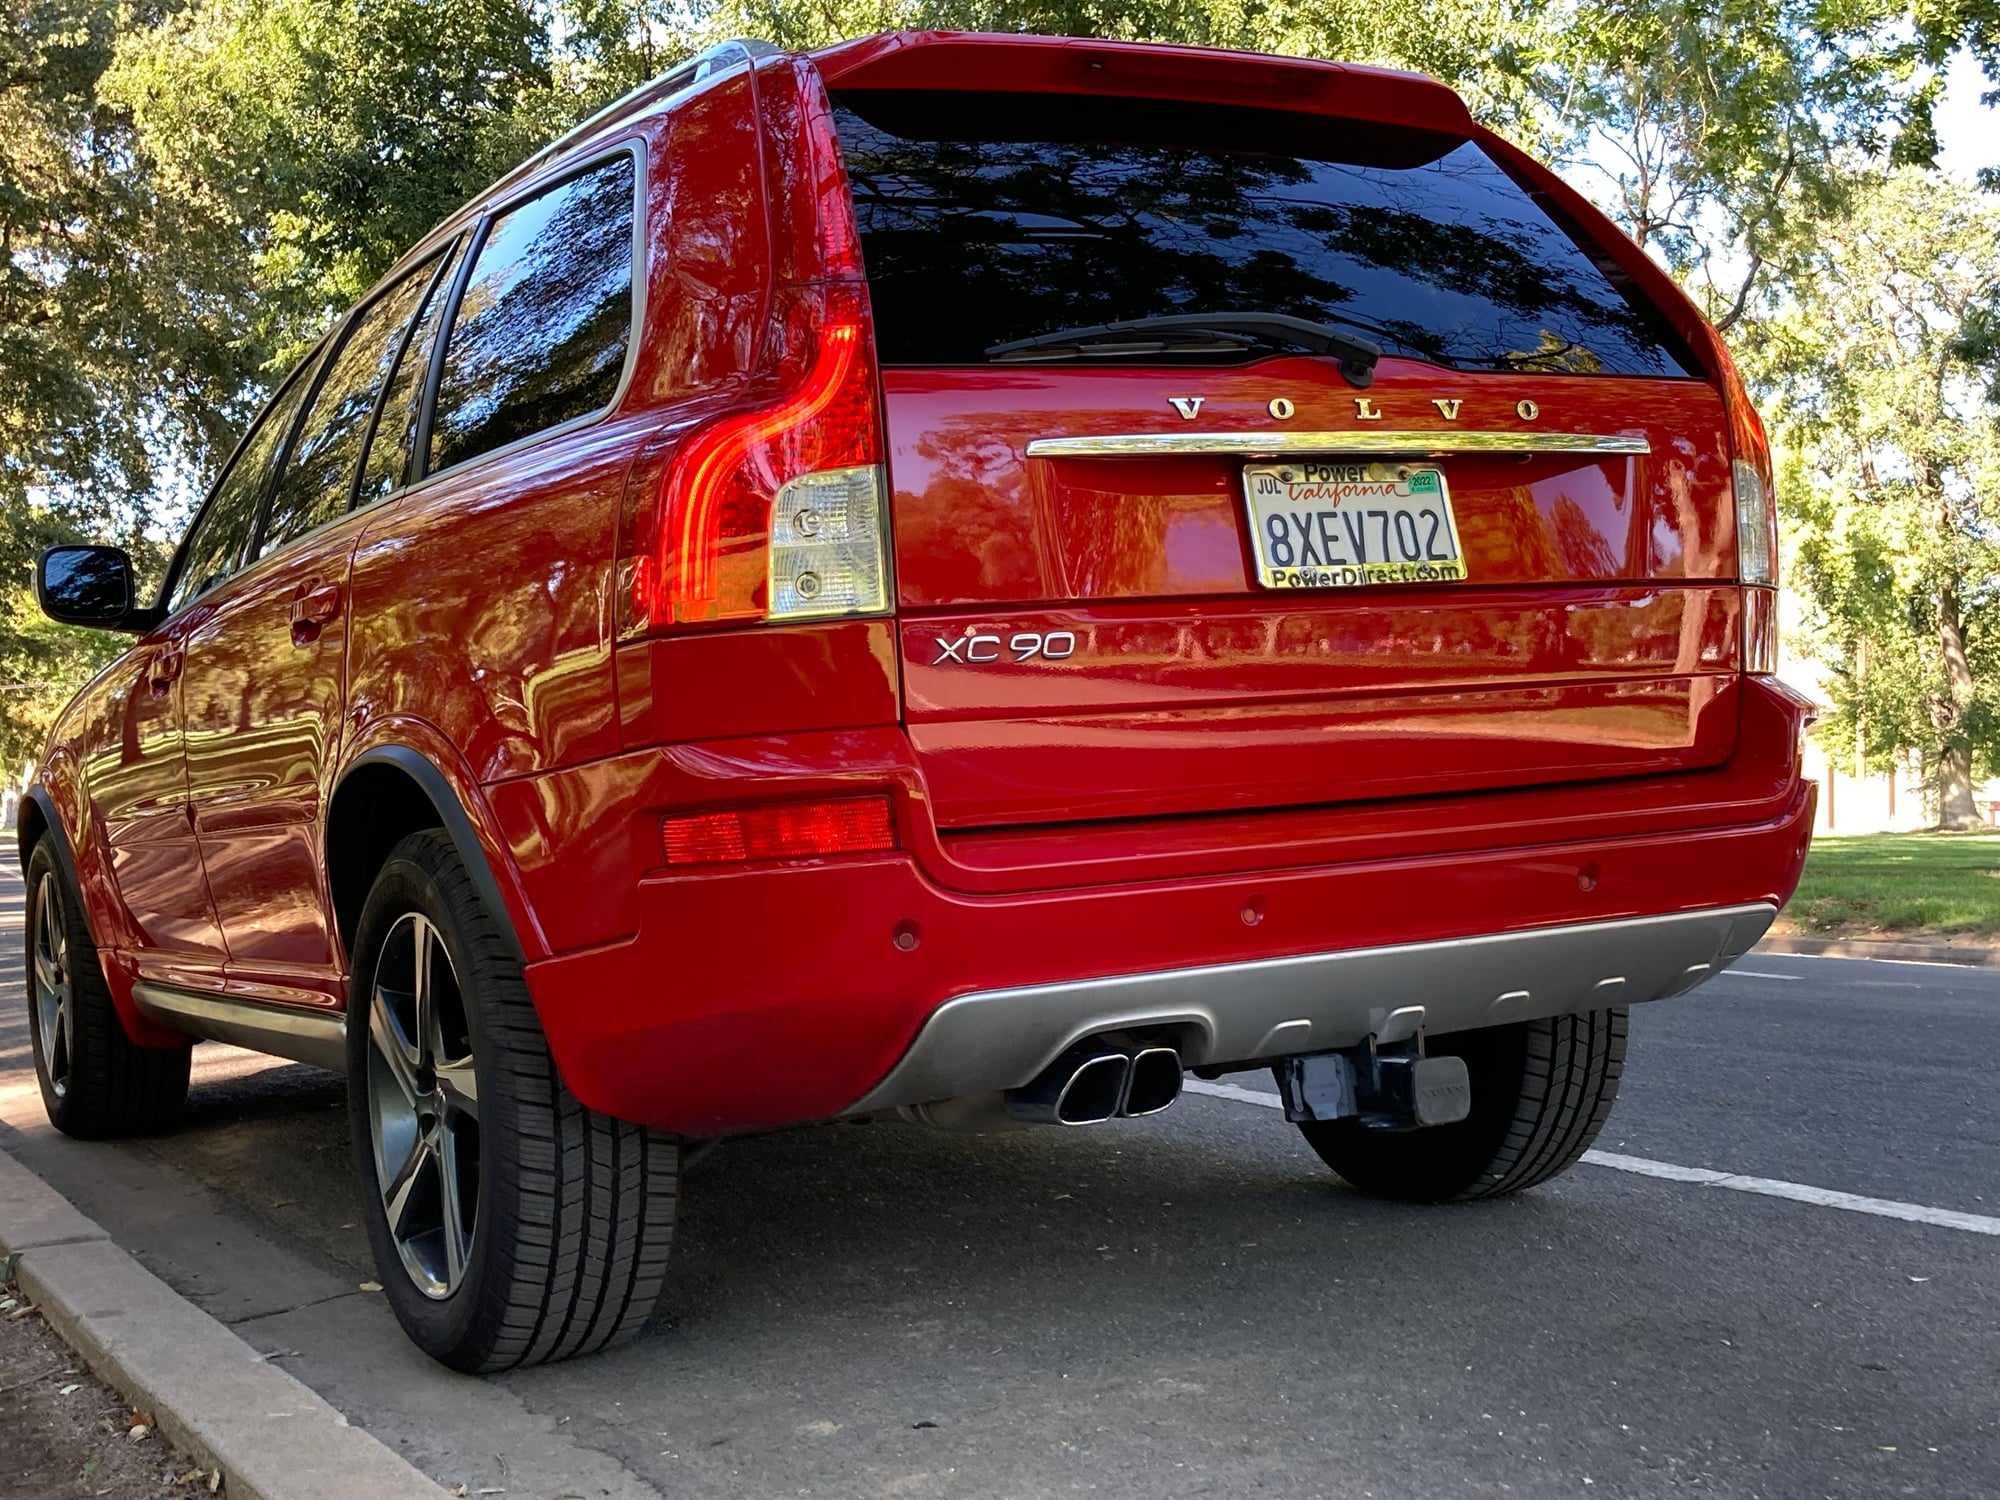 2013 Volvo XC90 - 2013 Volvo XC90 R-Design Red - Used - VIN YV4952CF2D1650675 - 154,000 Miles - 6 cyl - 2WD - Automatic - SUV - Red - Sacramento, CA 95832, United States